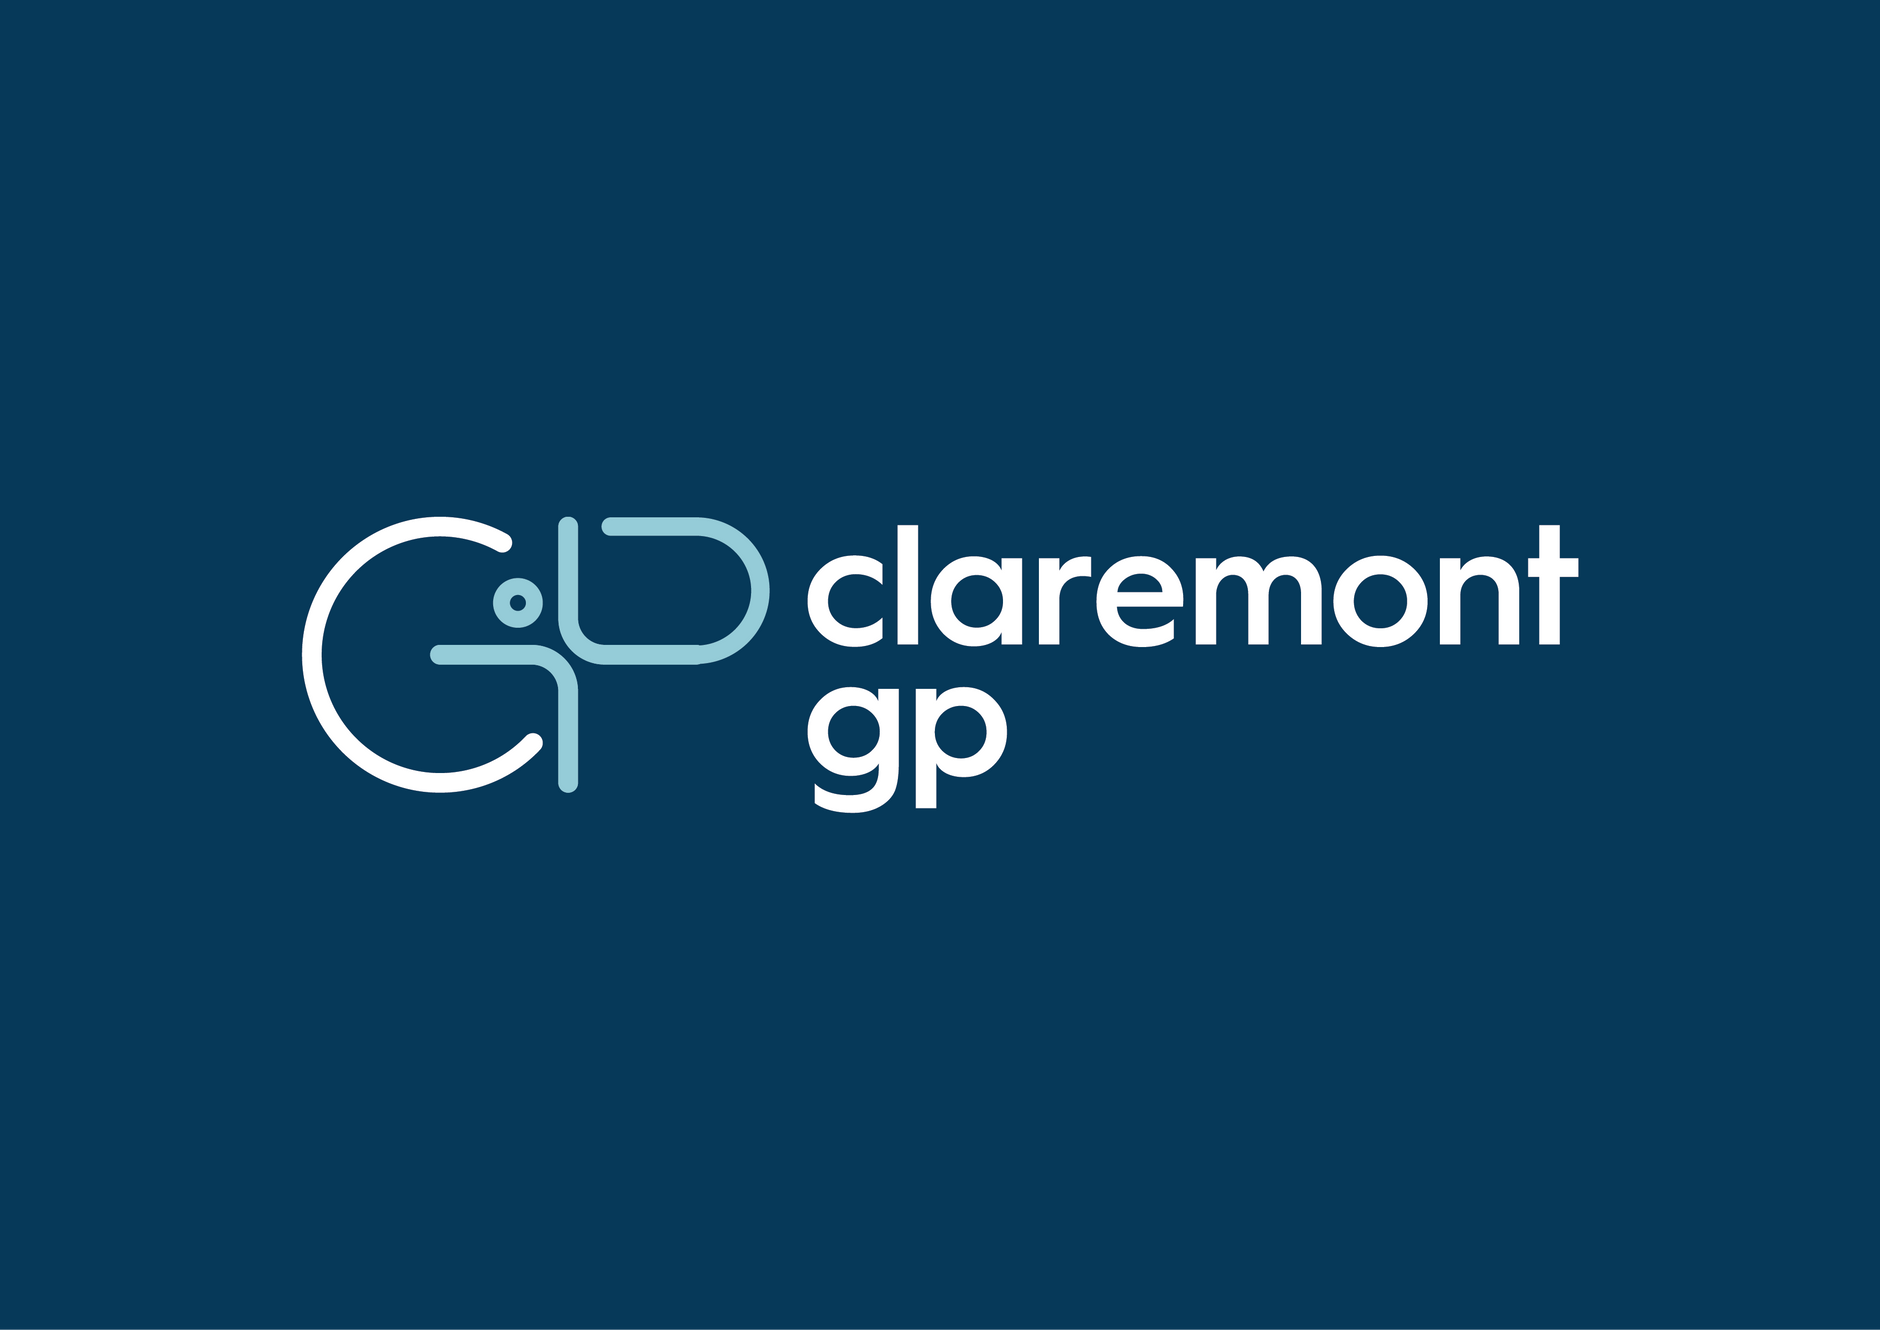 Home Health Agency | Wellness & Exceptional Care Services | ClaremontGP